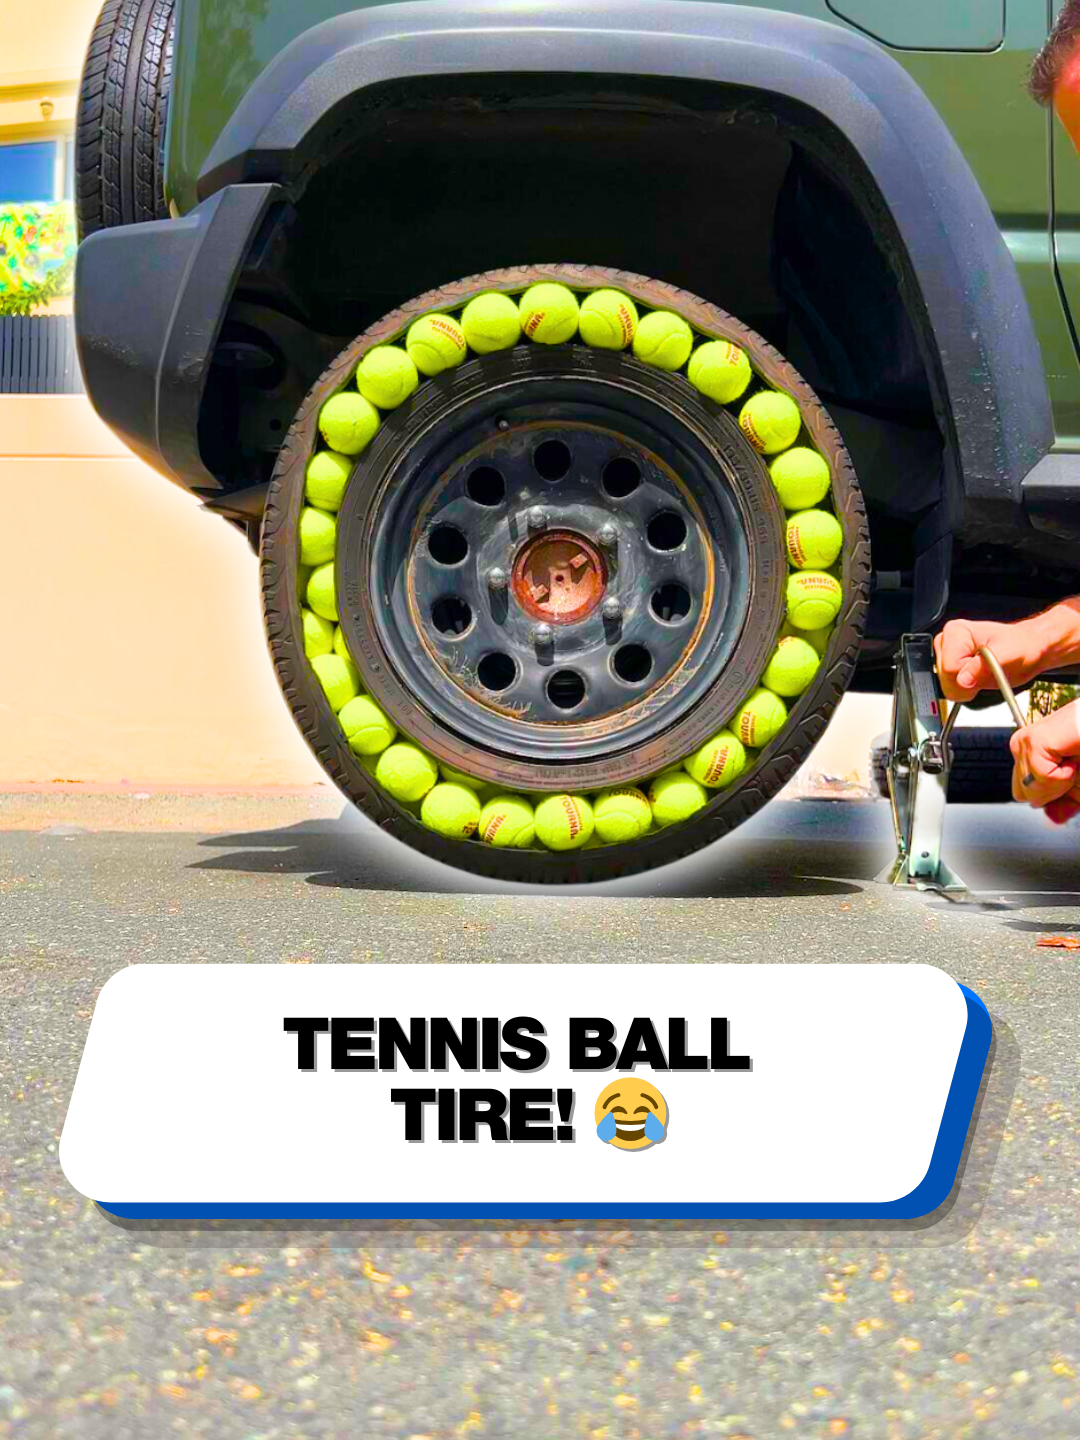 How many balls can you fit in a tire? 😂 #tennis #tennisball #crafting #craft #crafttok #cartok #tirechange #hack #hacks #challenge #supercar #supercarblondie